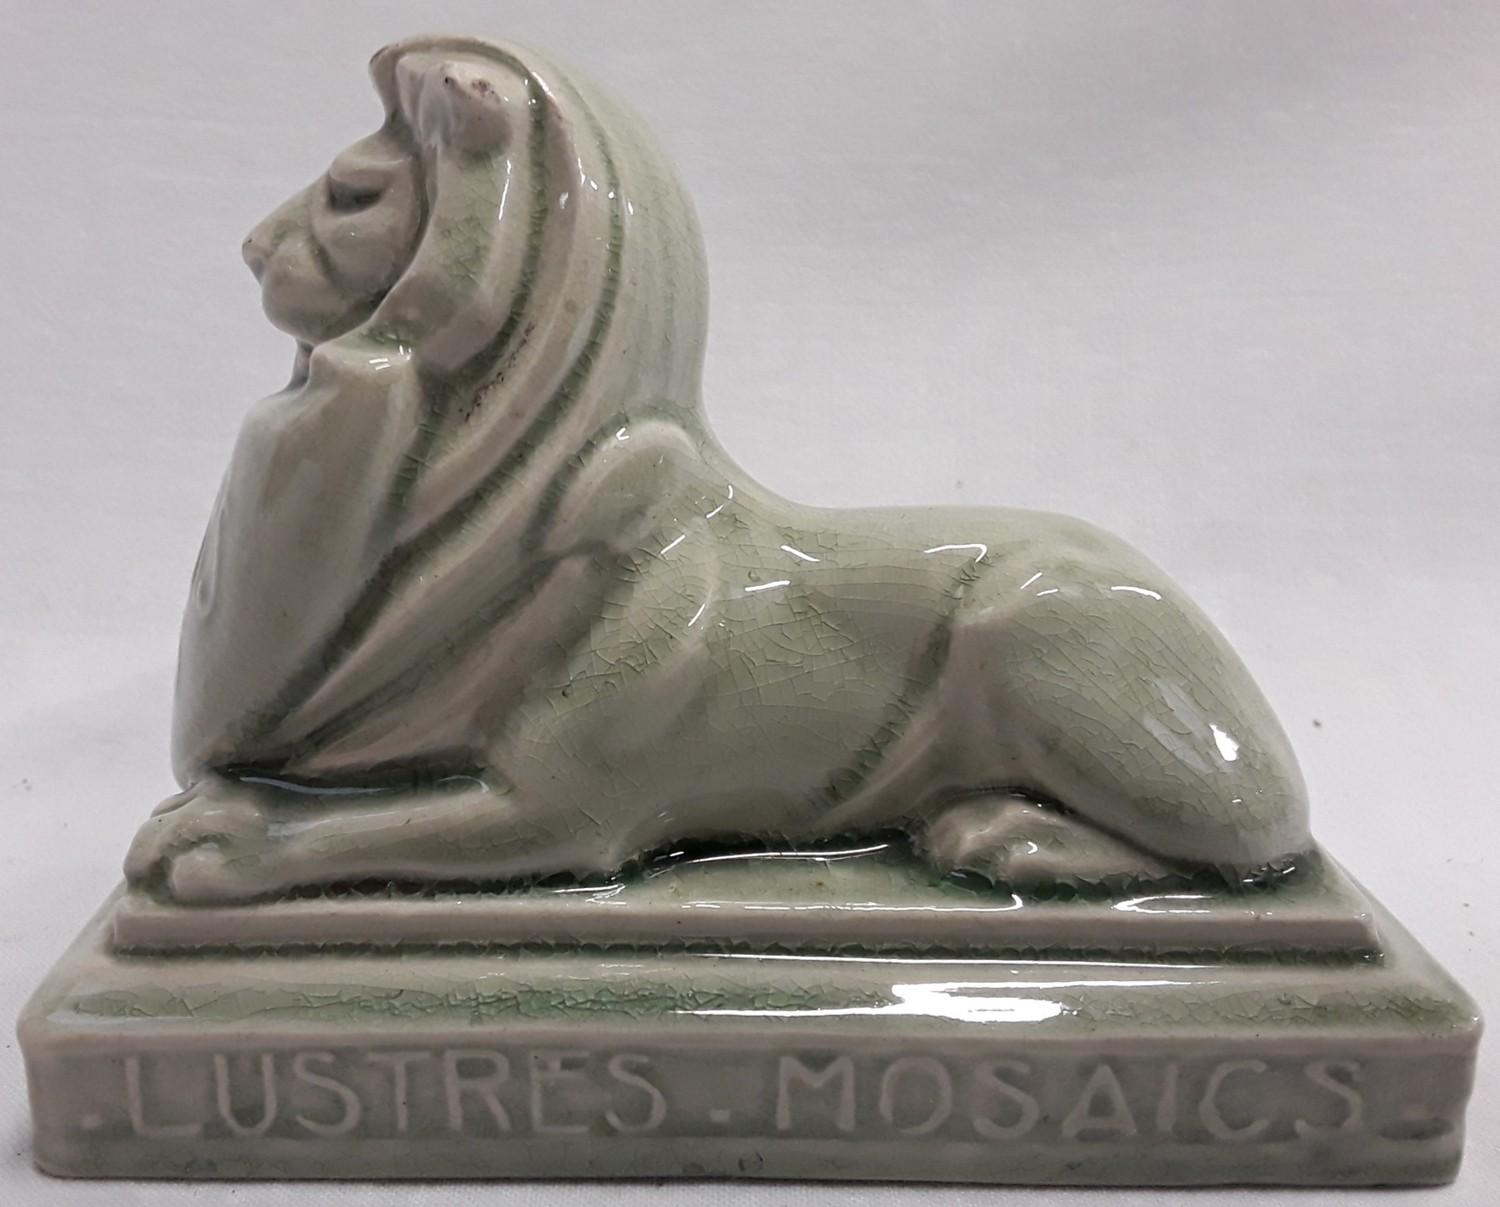 Carters & Co Poole Pottery Lustre advertising lion desk paperweight. - Image 2 of 5